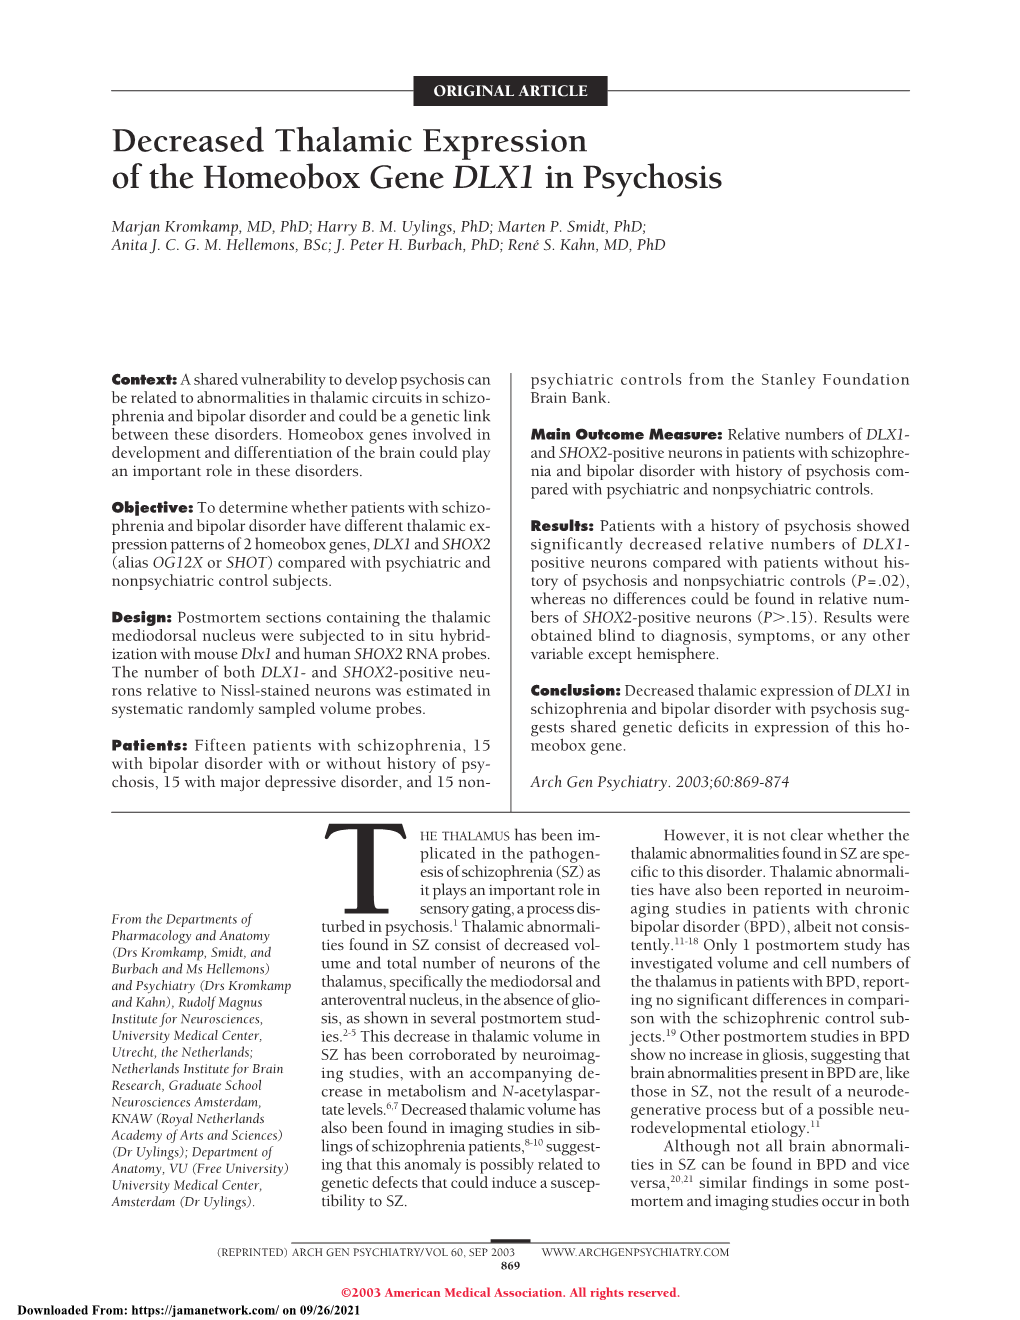 Decreased Thalamic Expression of the Homeobox Gene DLX1 in Psychosis